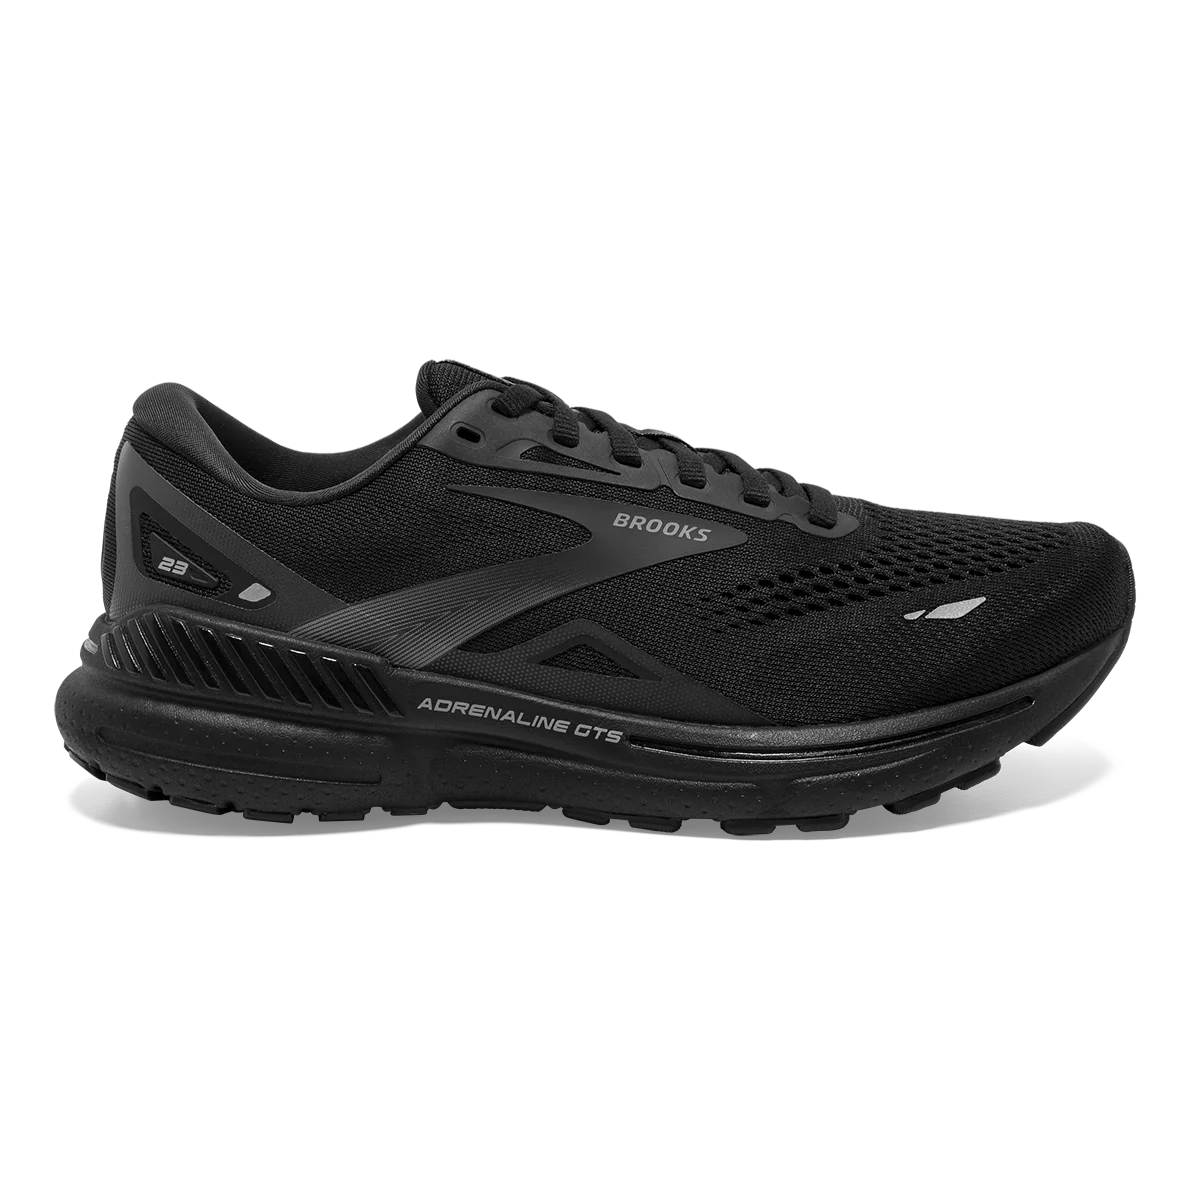 Lateral view of the Men's Adrenaline GTS 23 by Brooks in the color Black/Black/Ebony